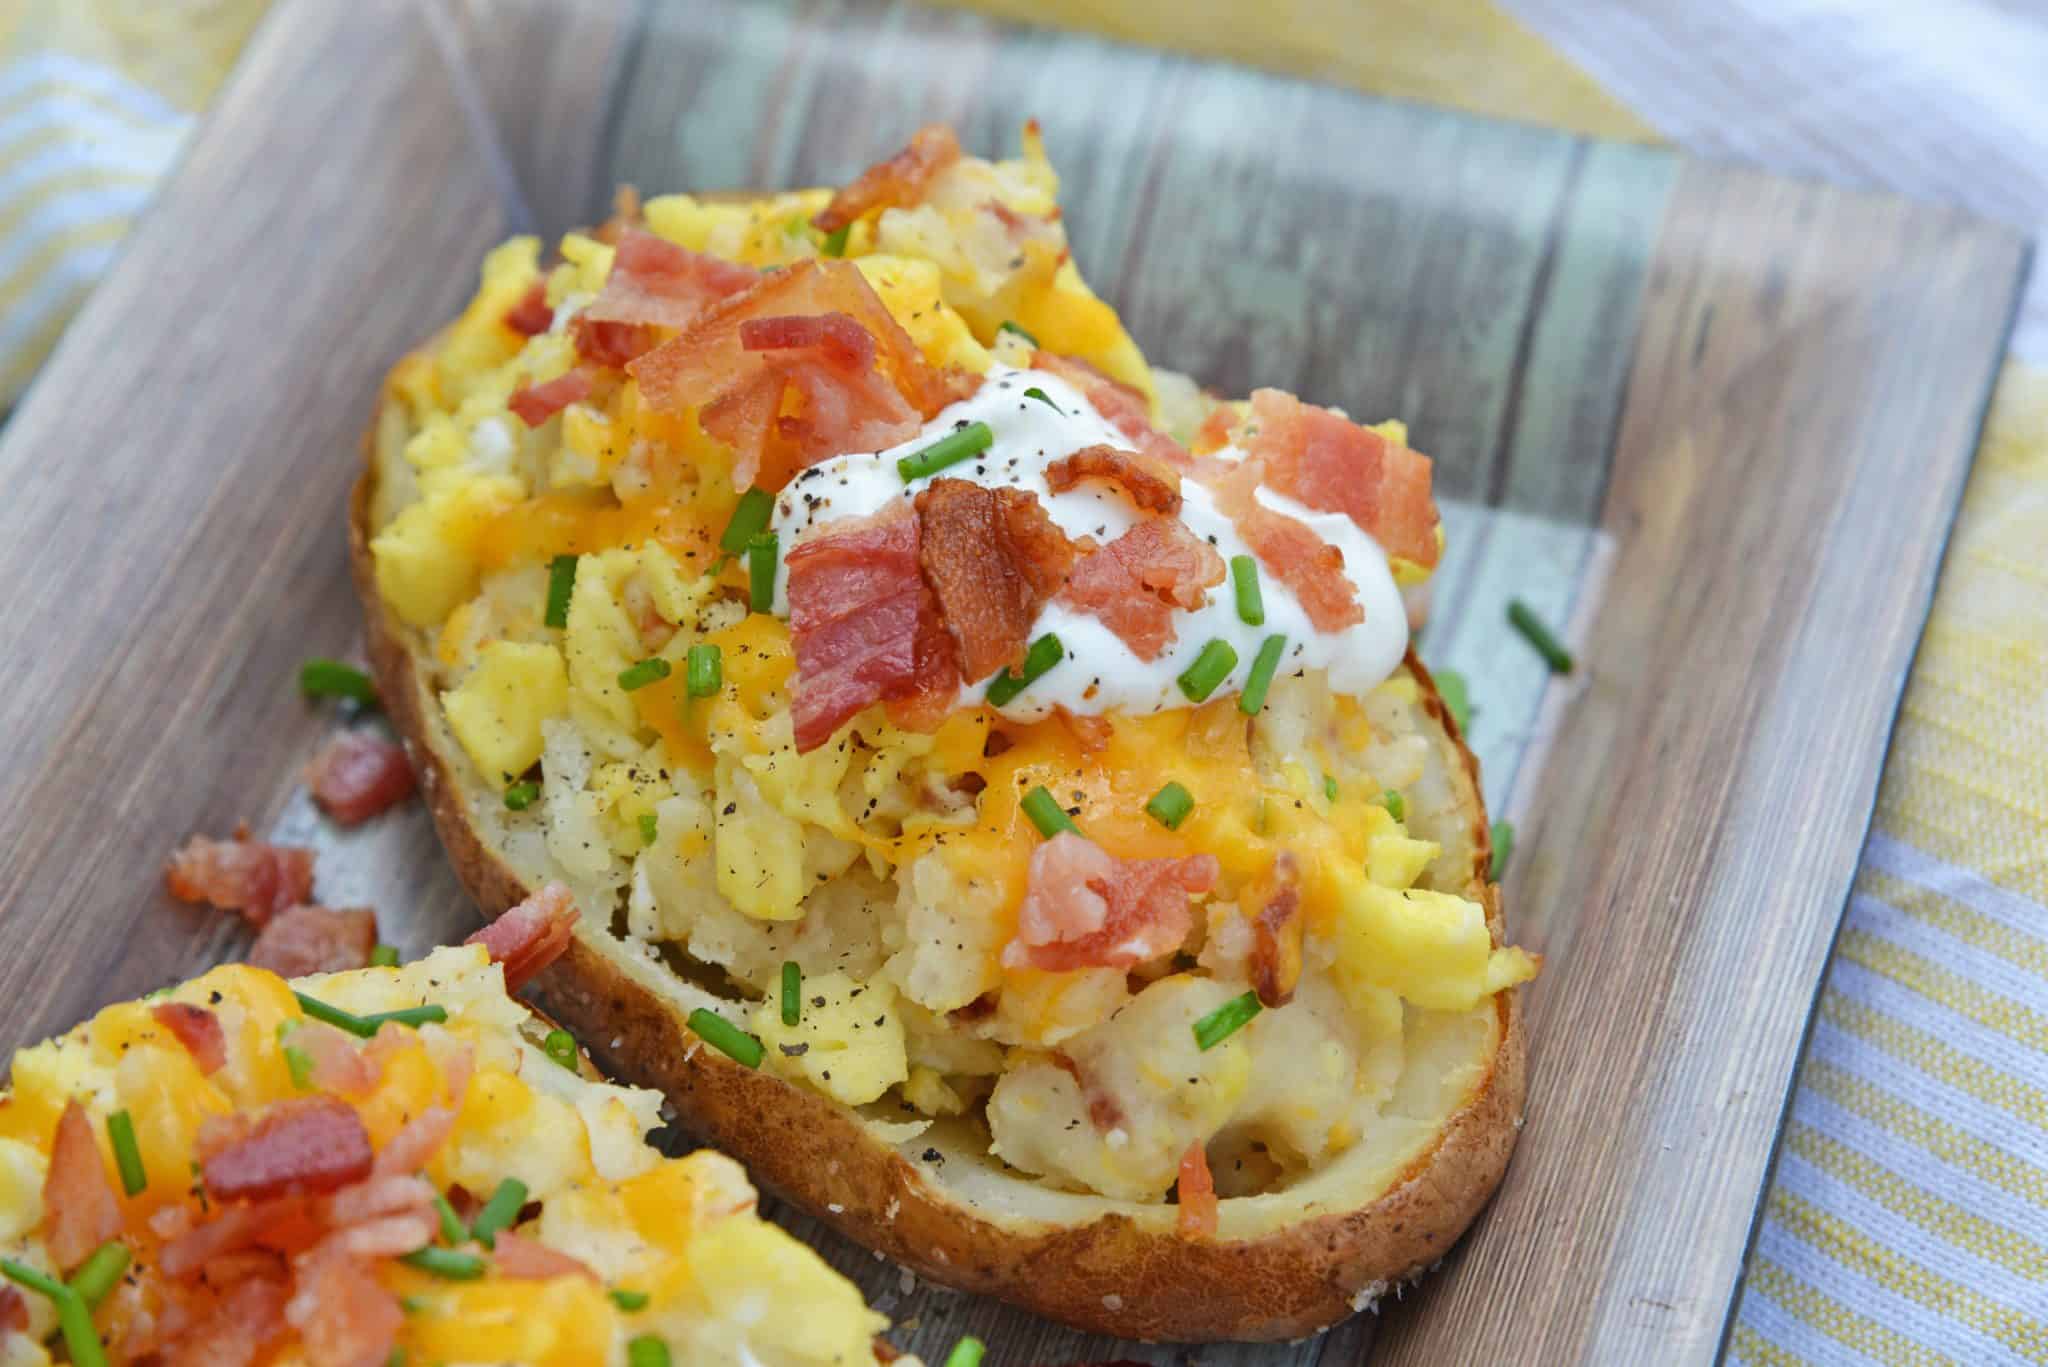 Twice Baked Breakfast Potatoes use leftover potatoes with scrambled eggs, cheddar cheese, chives, sour cream and BACON for the perfect easy breakfast recipe. #breakfastpotatoes www.savoryexperiments.com